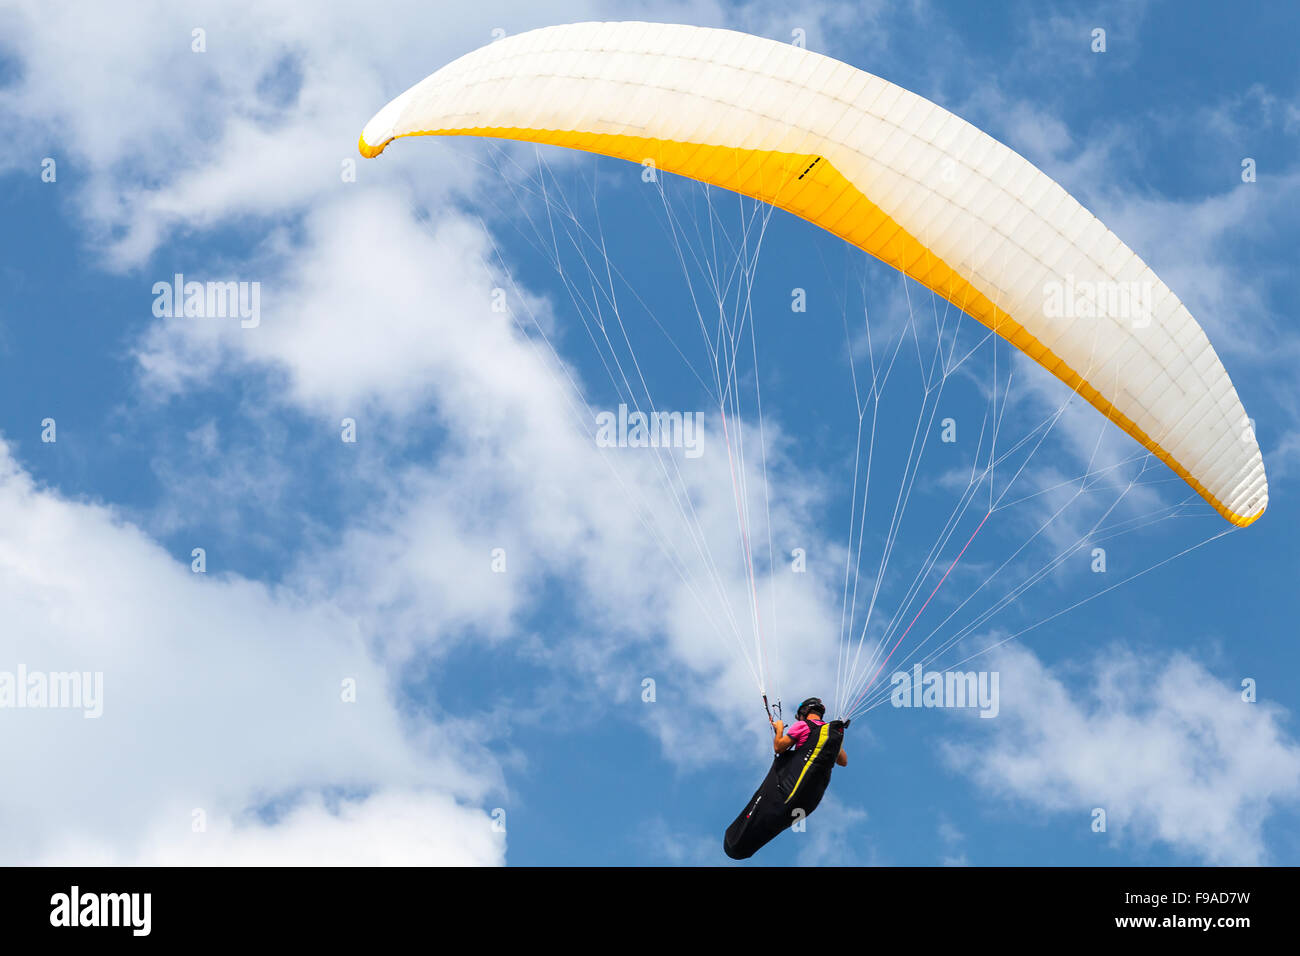 Burgas, Bulgaria - July 23, 2014: Amateur paraglider in blue sky with clouds Stock Photo